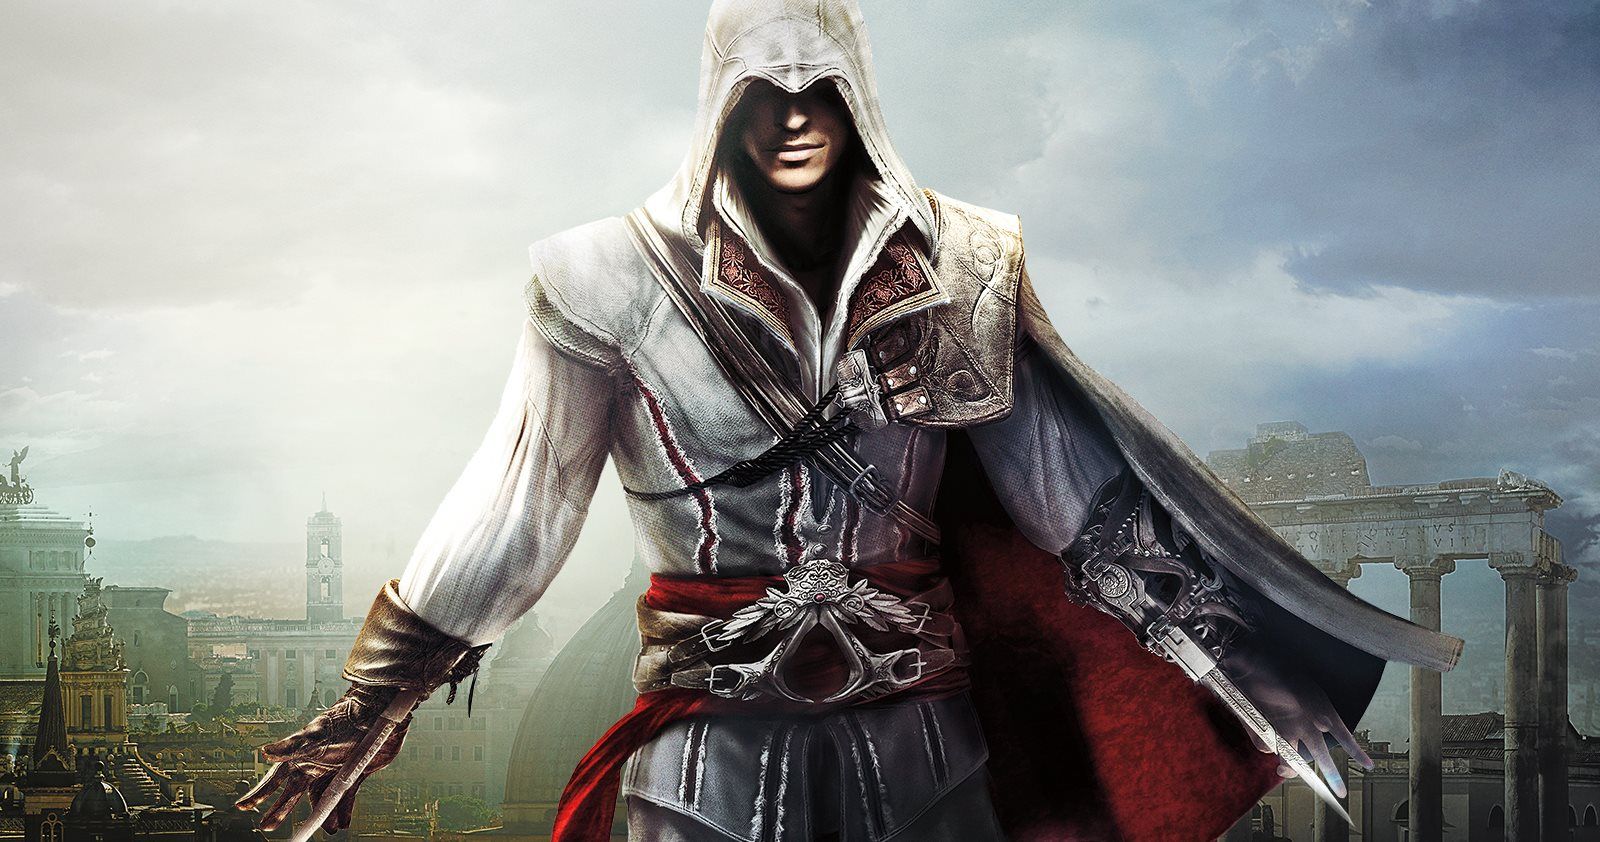 Dredd Producer Developing Assassin's Creed Anime Series